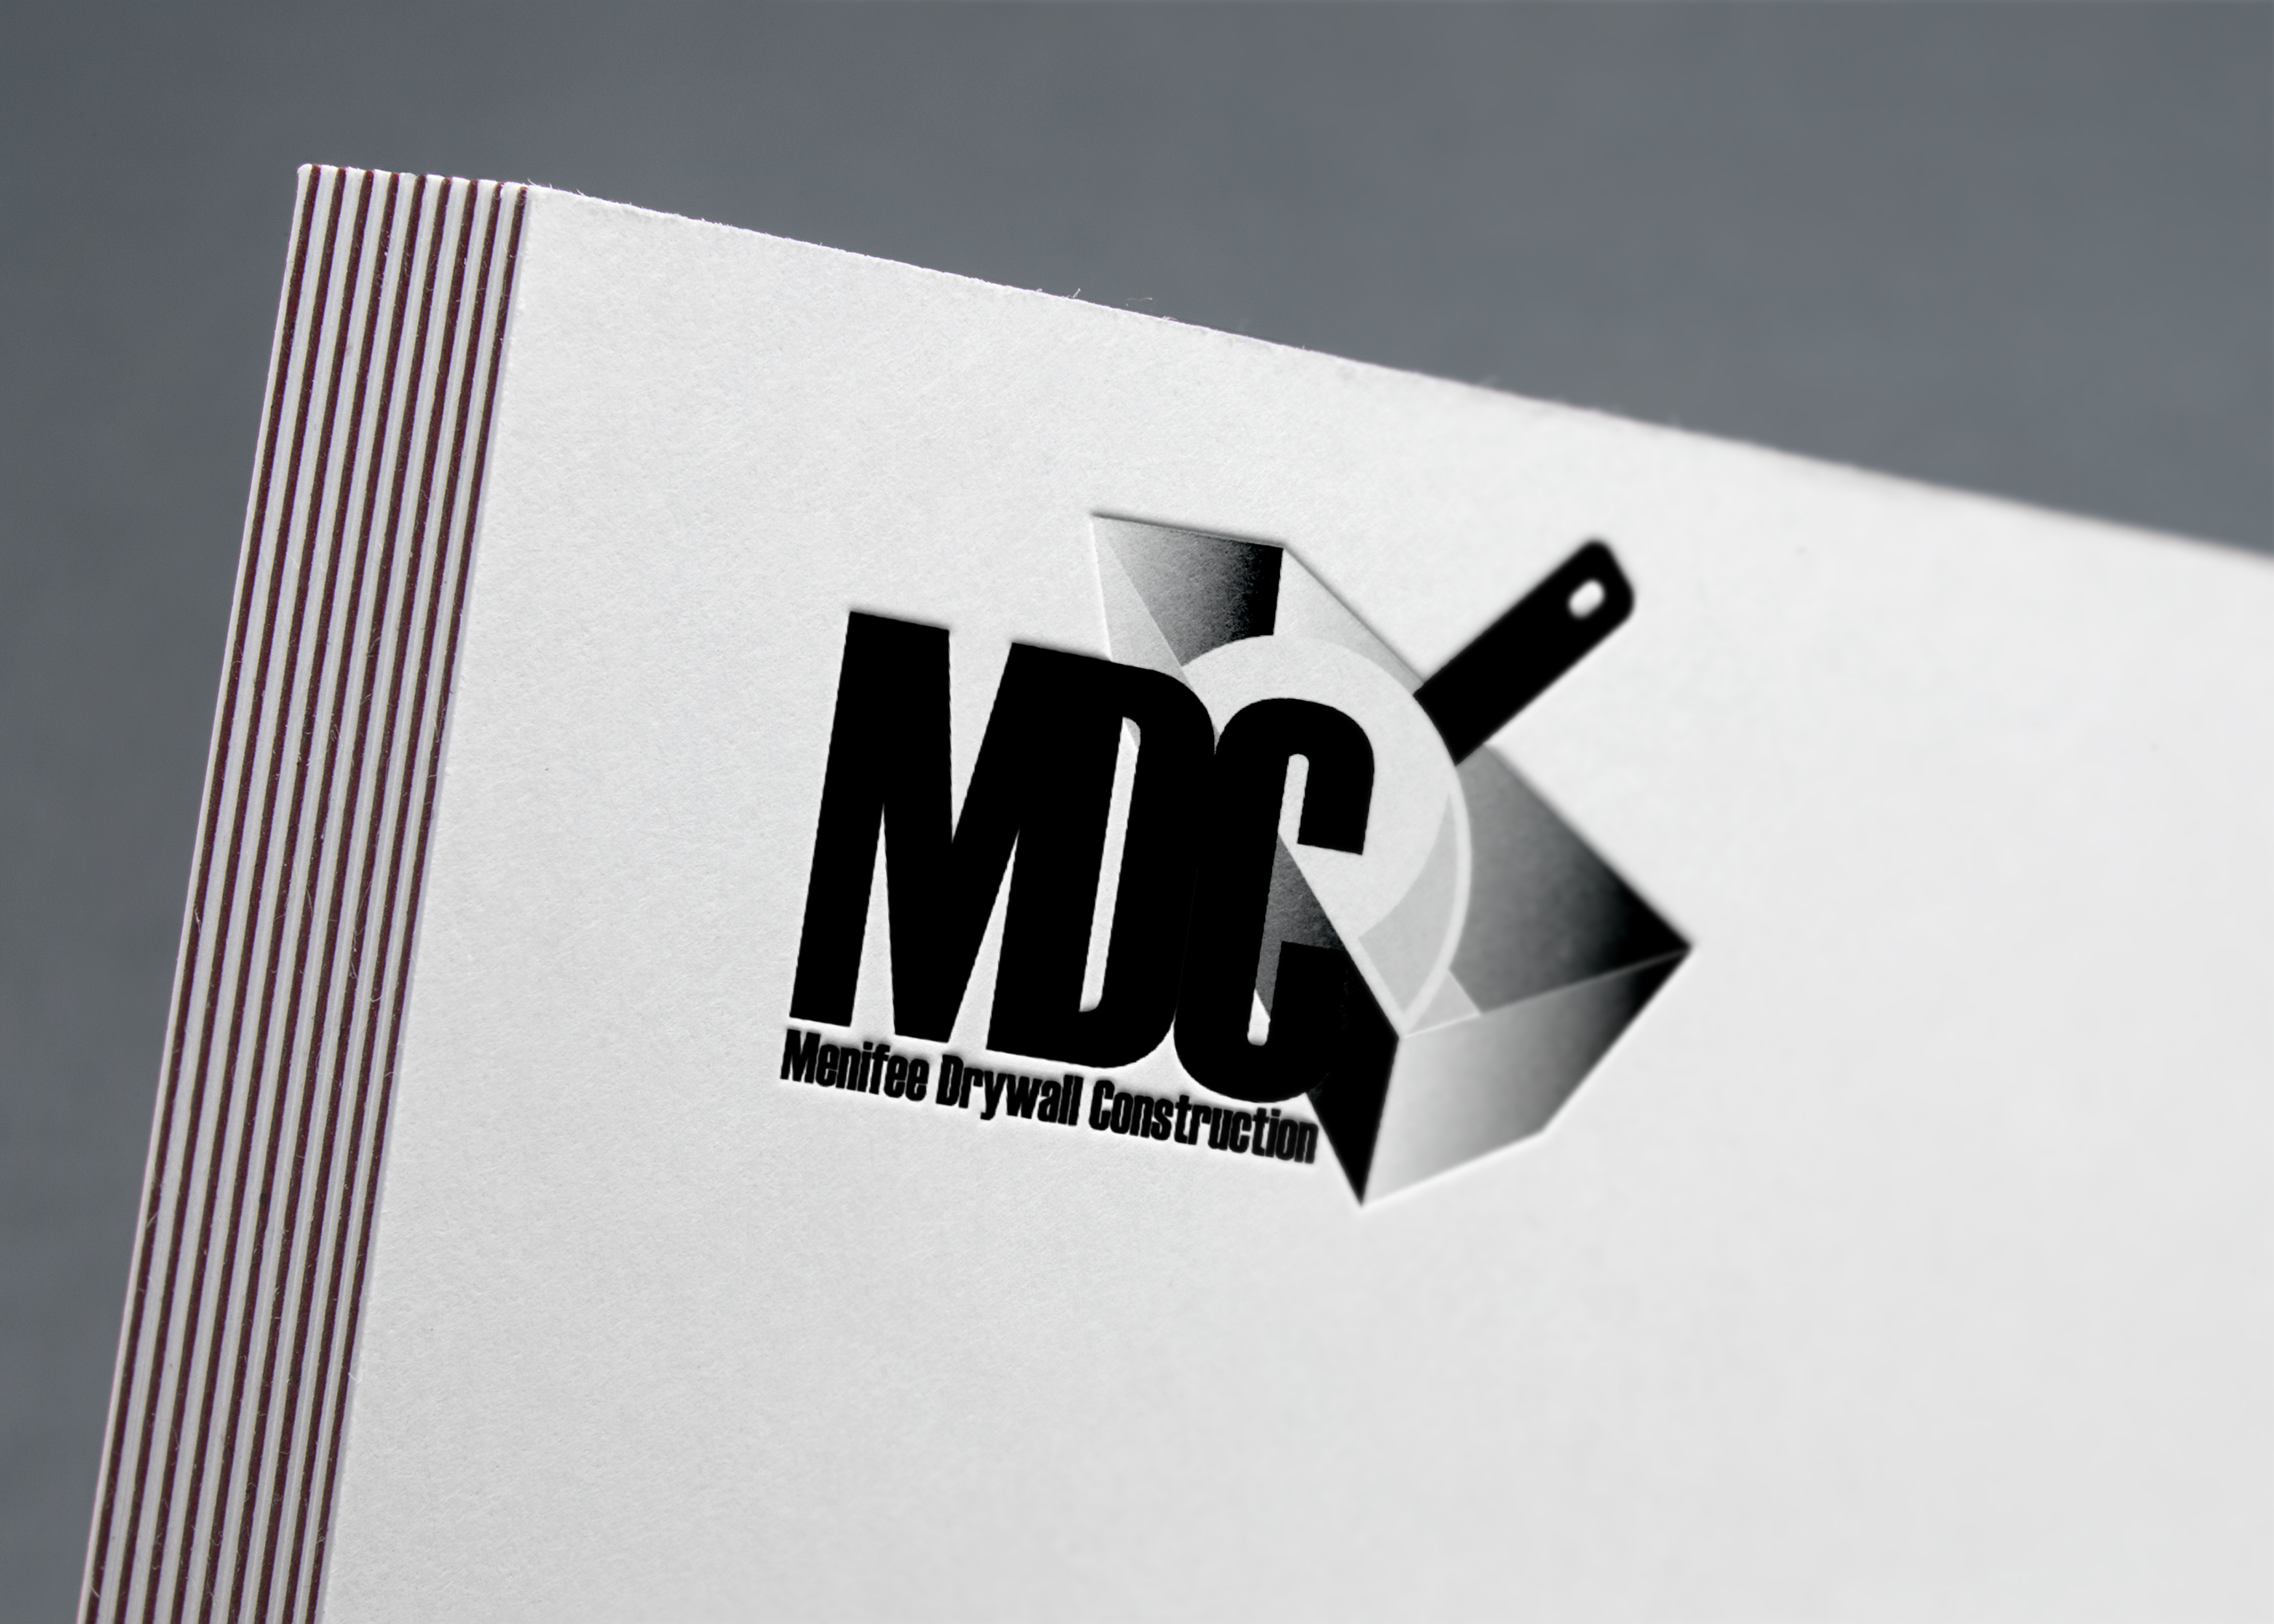 MDC brand logo printed and embossed on a card.